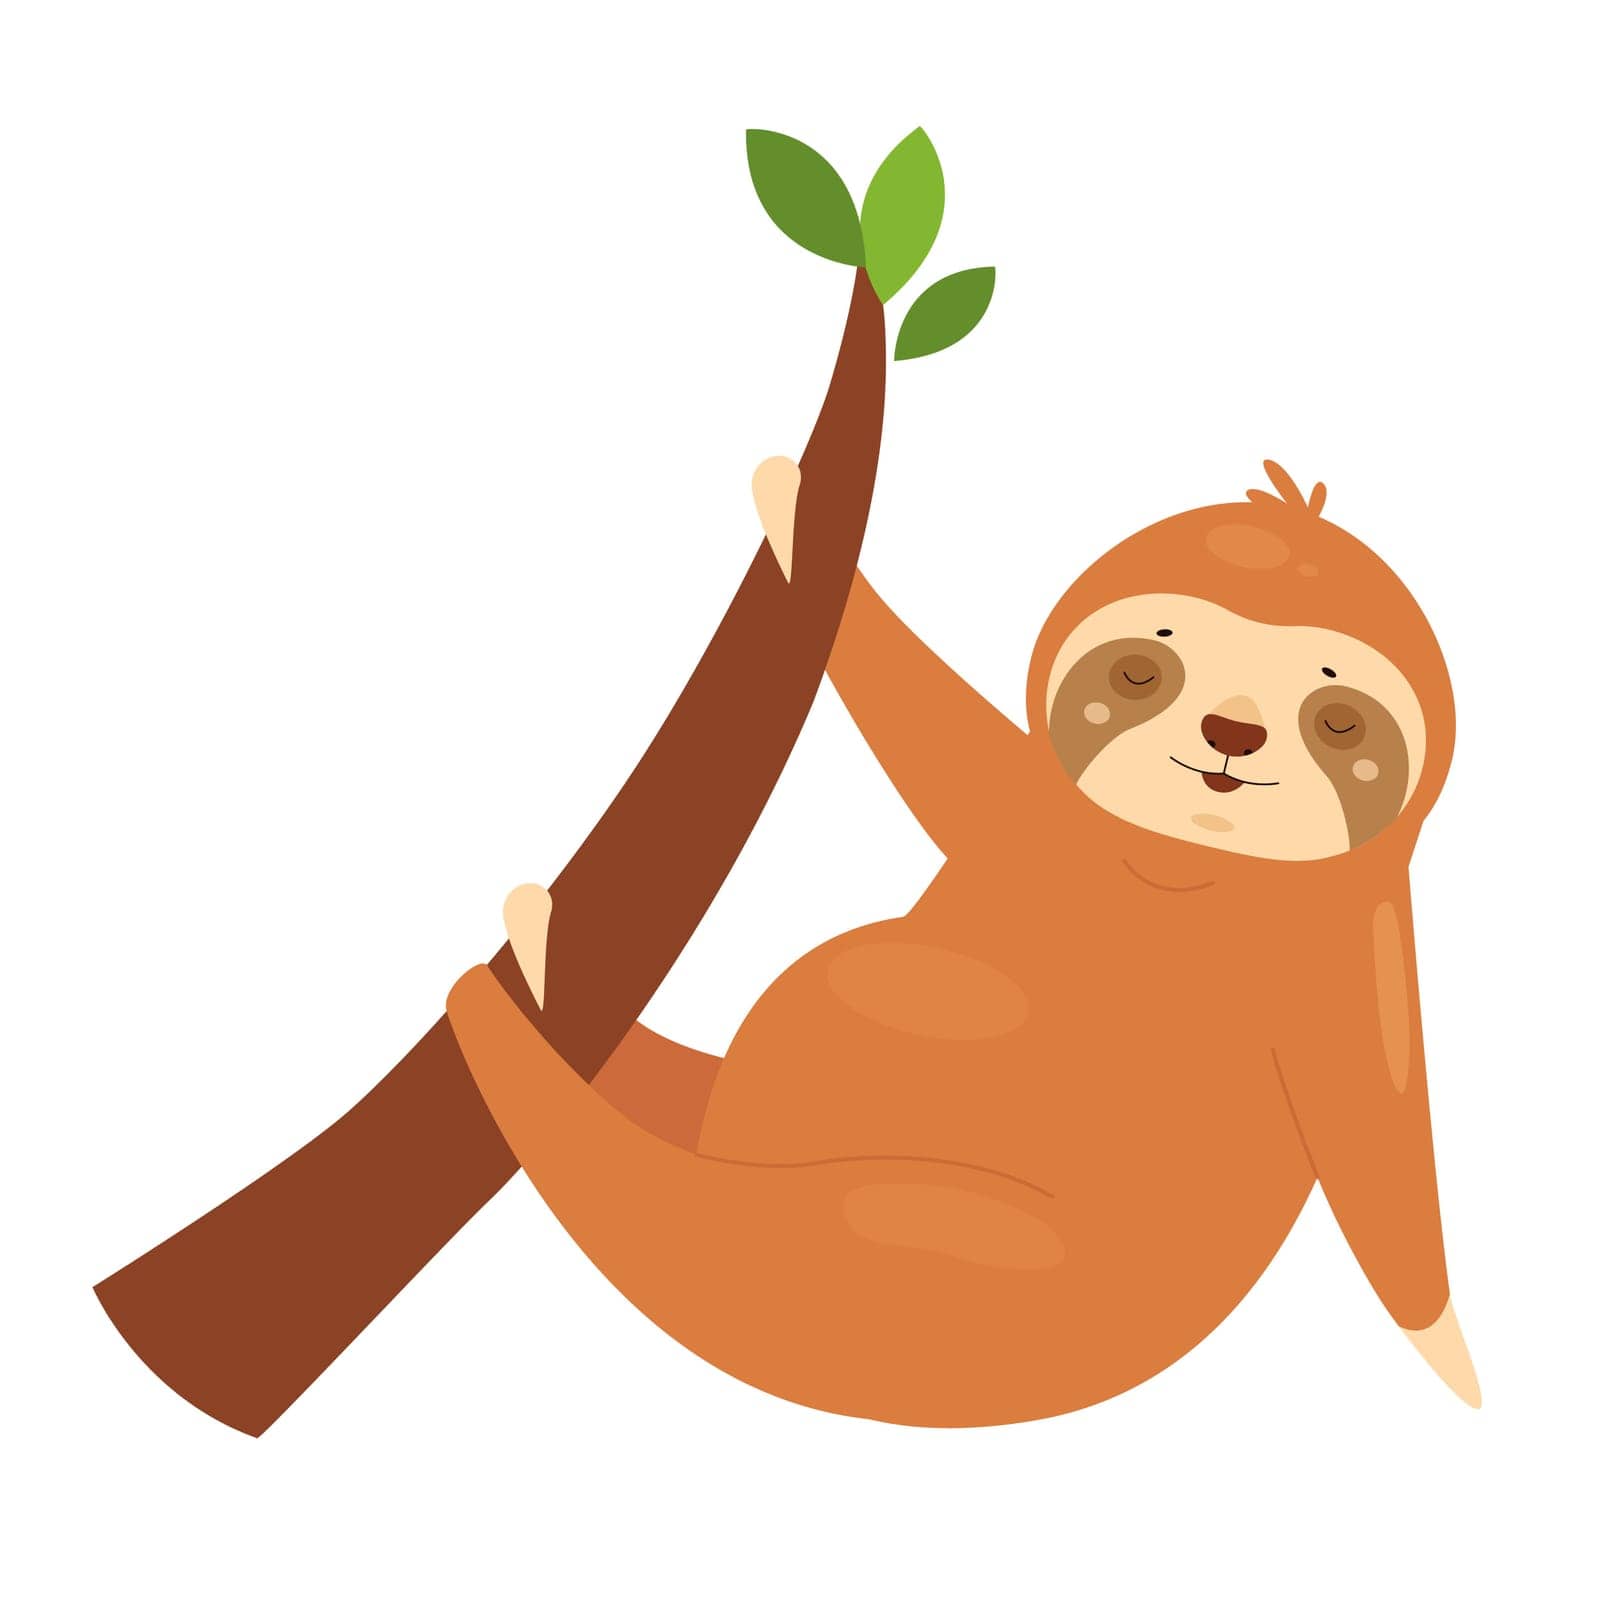 Hanging sloth animal on tree. Lazy bear on branch, relaxed arboreal mammal vector illustration